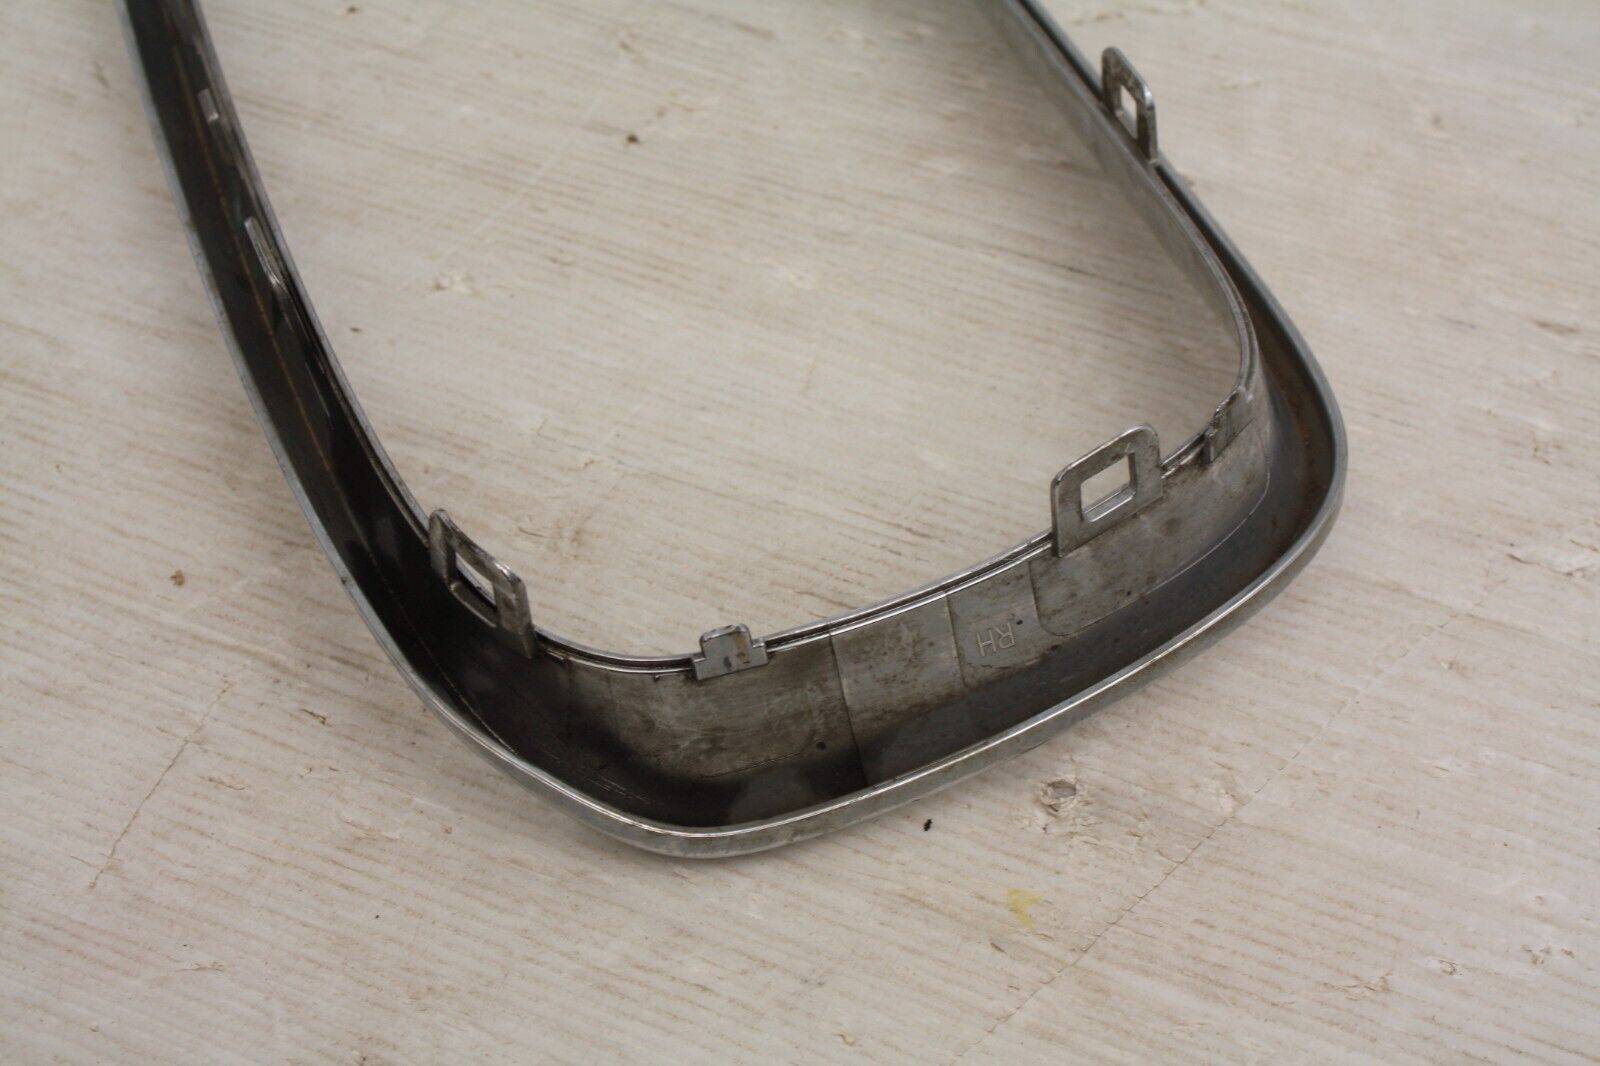 BMW-1-Series-F20-LCI-Front-Bumper-Right-Kidney-Grill-2015-to-2018-7371748-175773685996-15